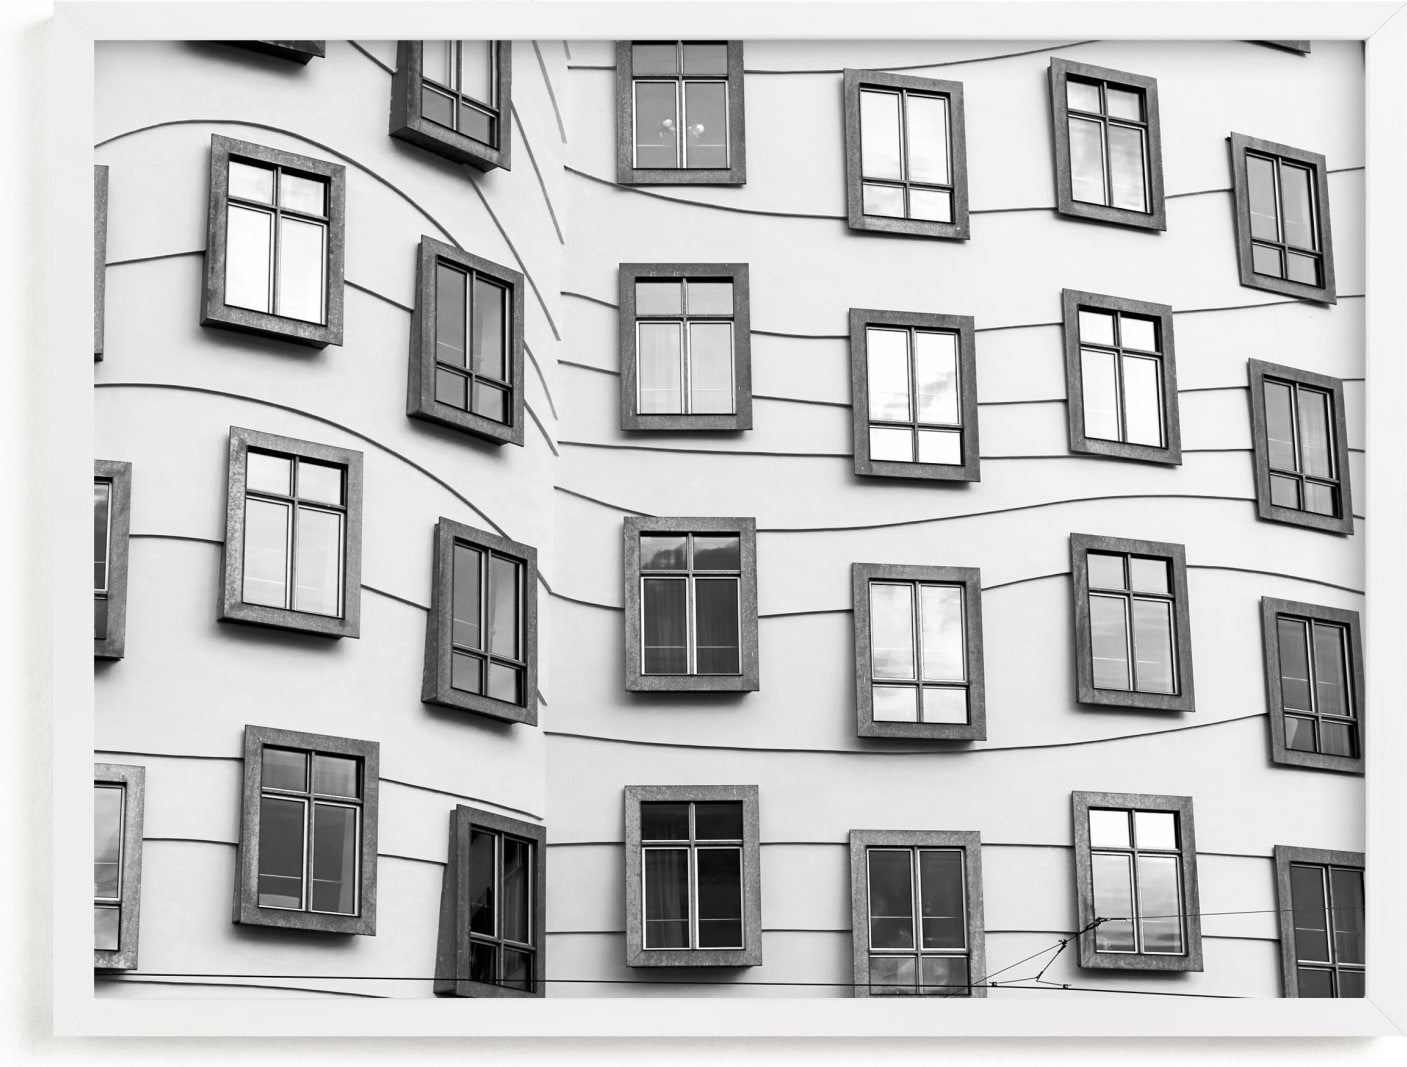 This is a black and white art by Igor called Windows.